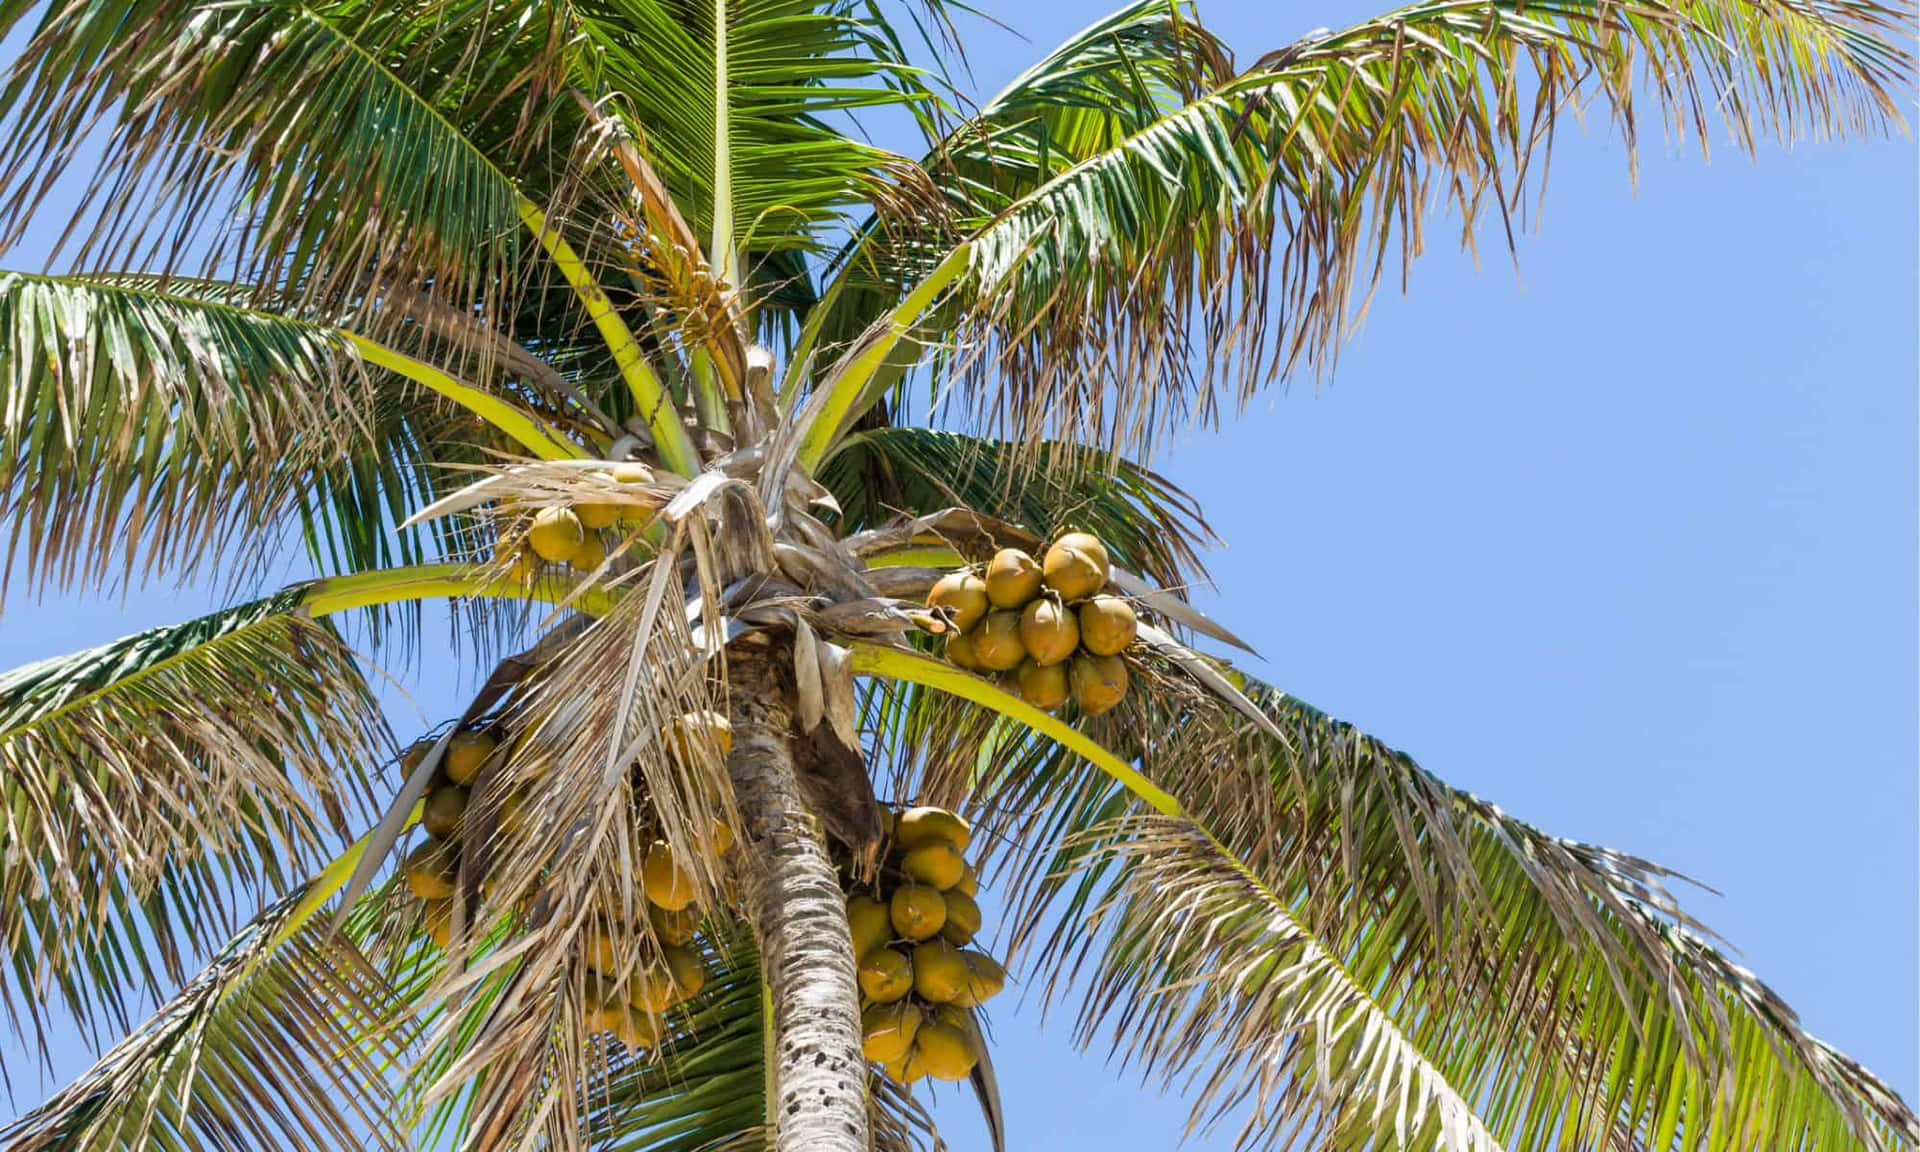 Download Majestic Coconut Tree by the Beach | Wallpapers.com